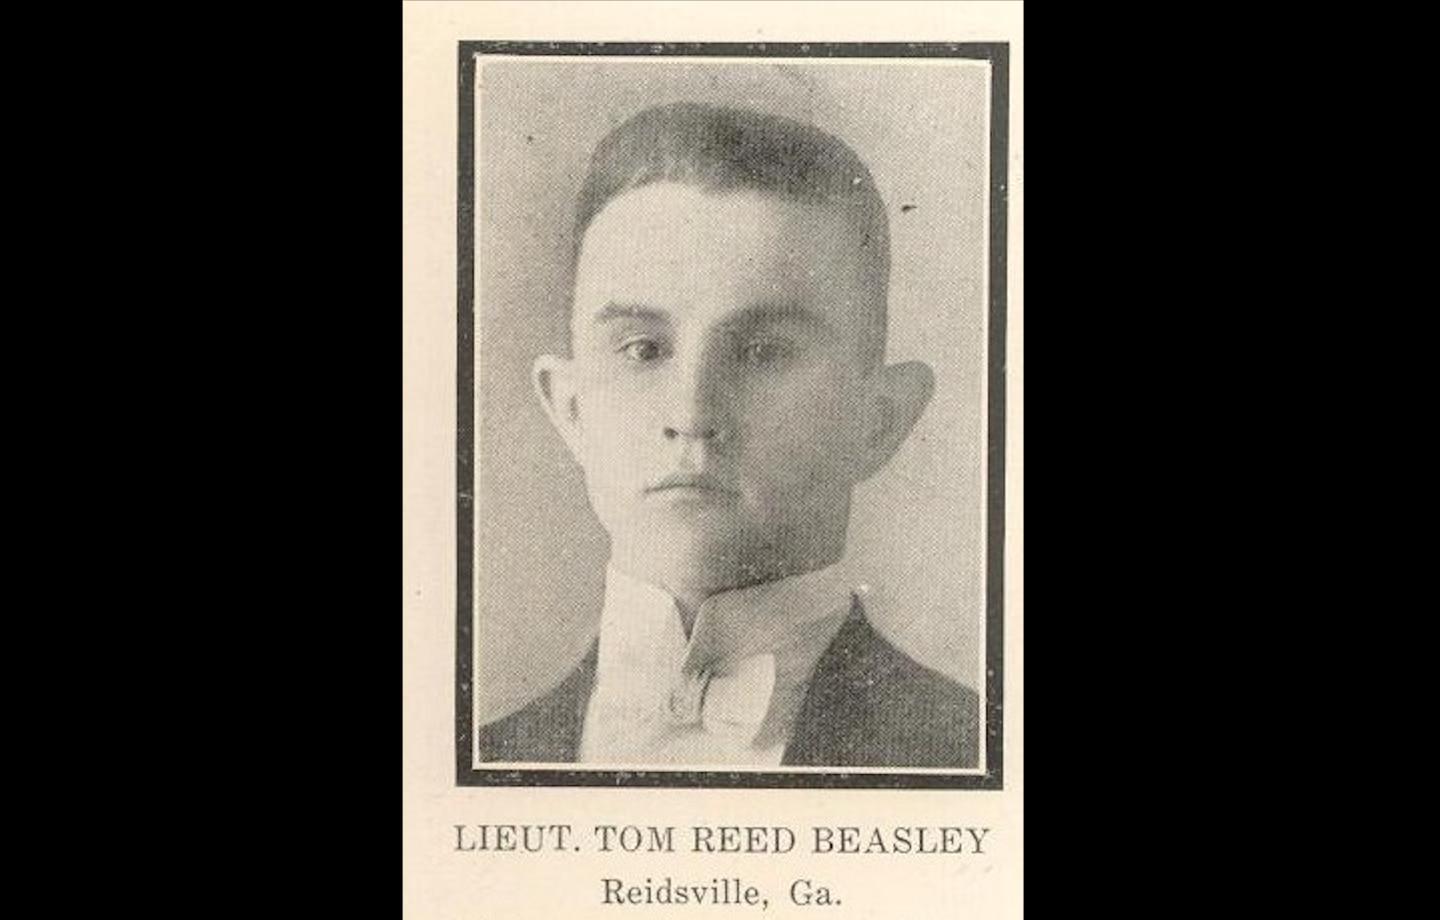 Thomas Beasley was killed in action on the Meuse-Argonne front in October 1918. (Courtesy photo/family)  Marne Division honors fallen soldier in special ceremony 103 years later